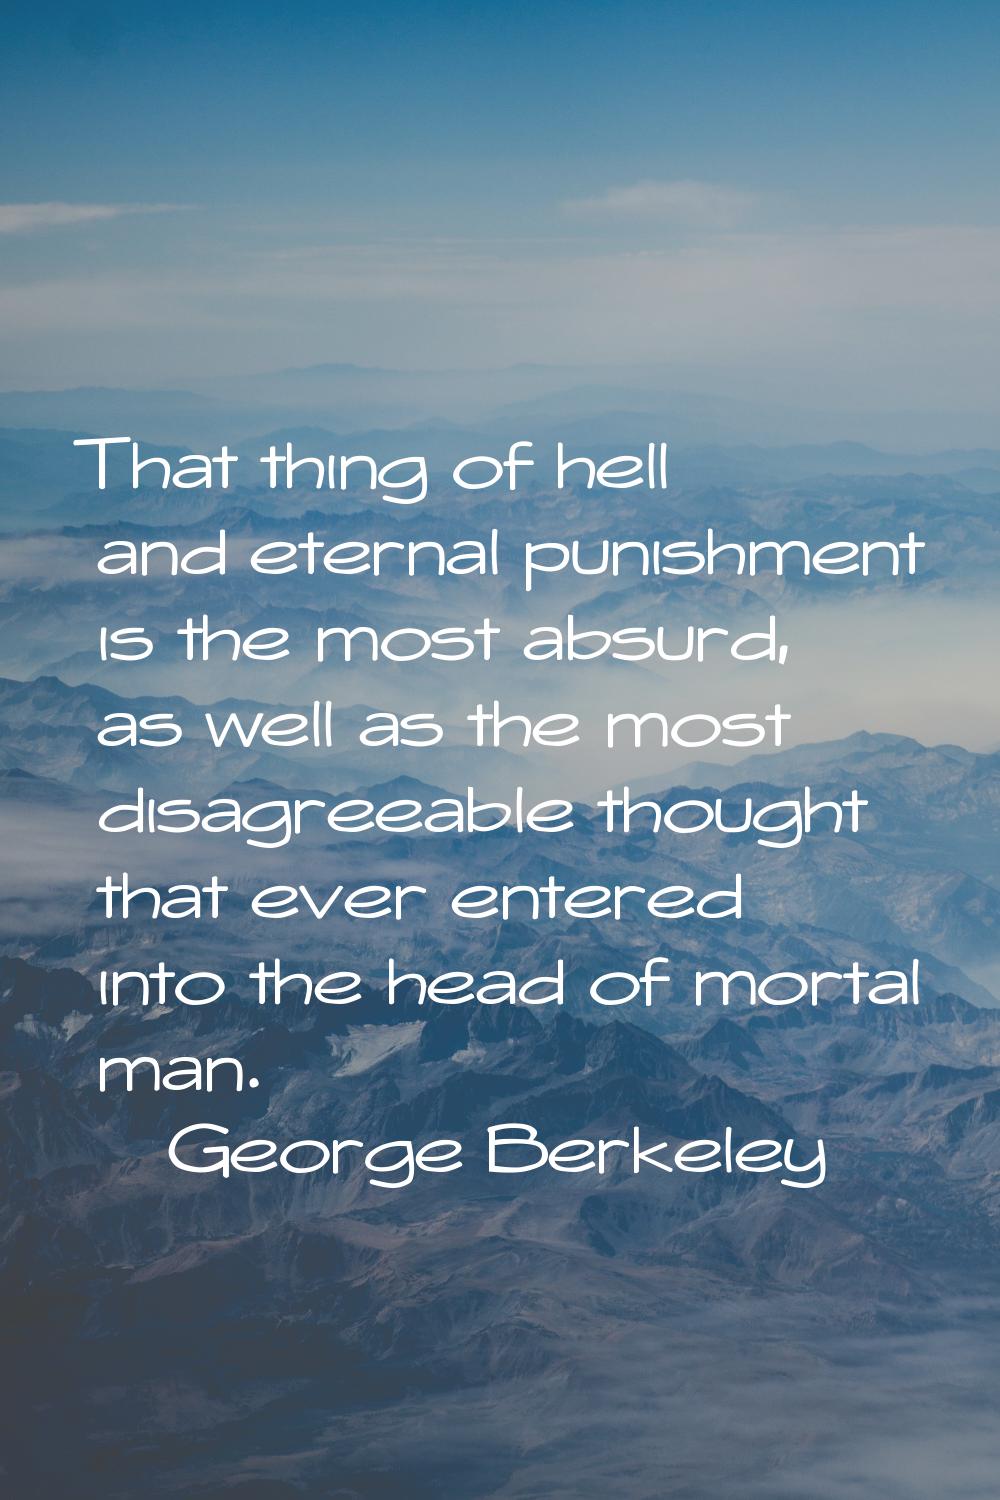 That thing of hell and eternal punishment is the most absurd, as well as the most disagreeable thou